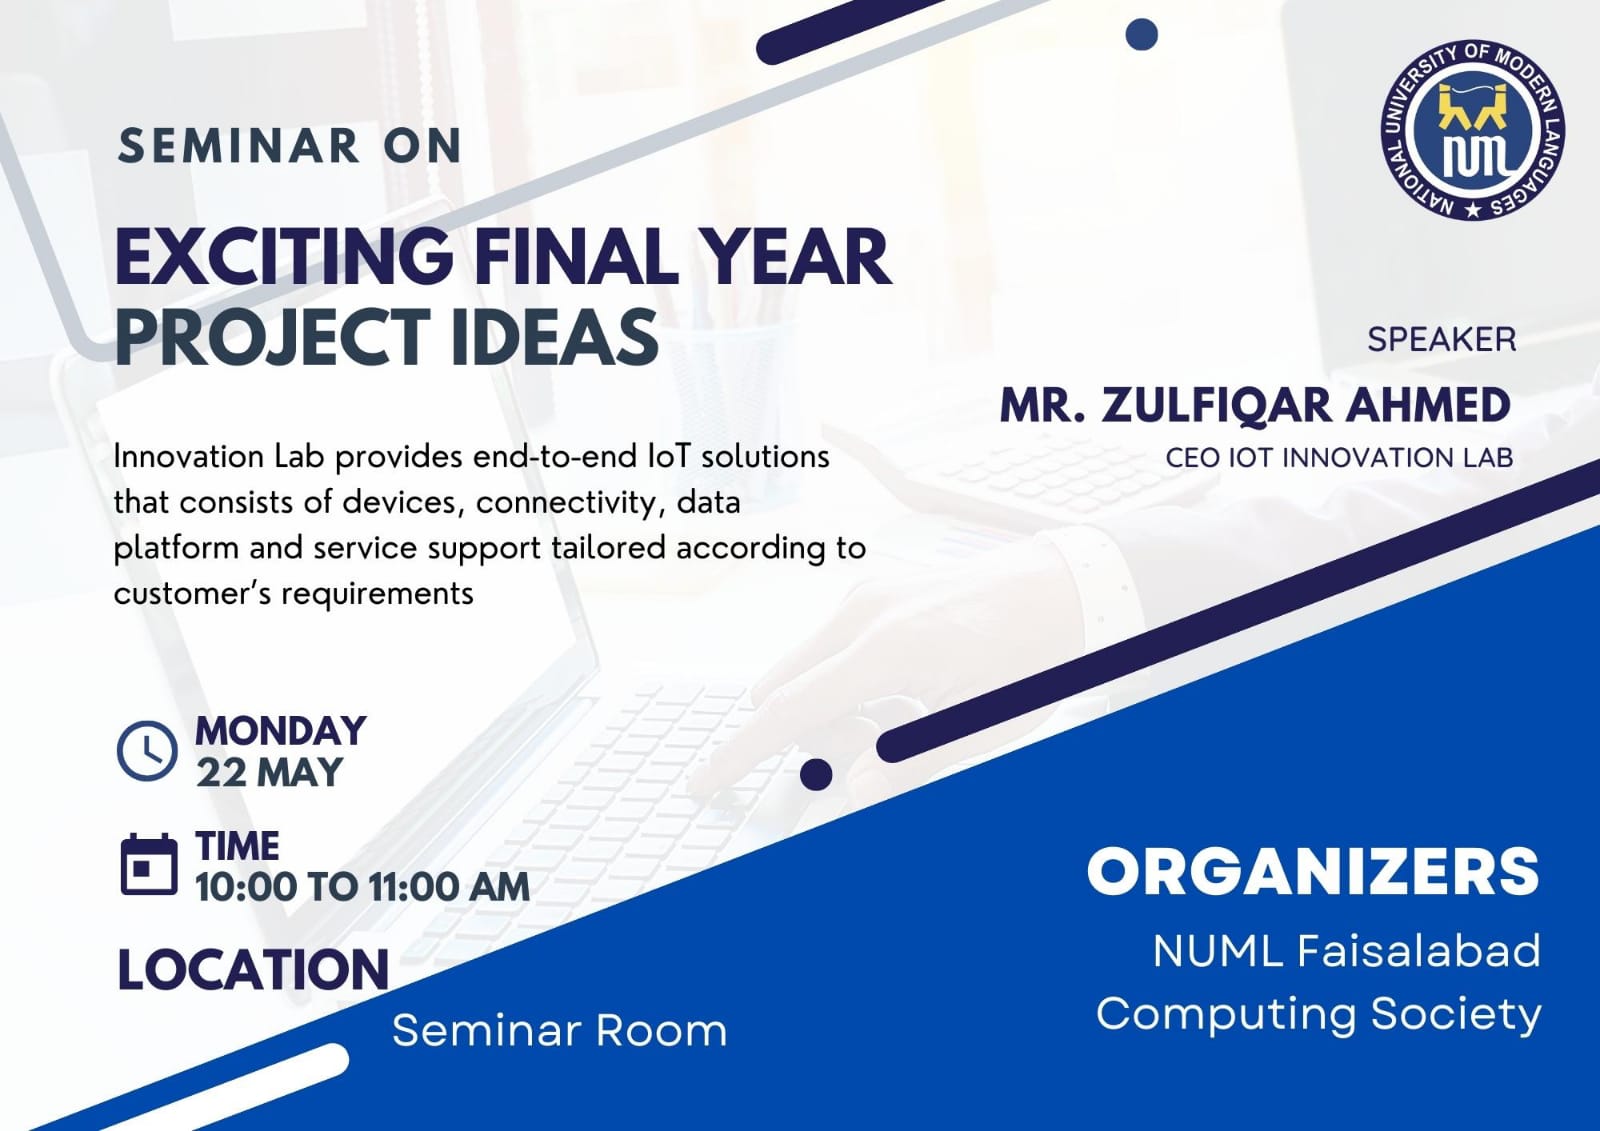 Seminar on "Exciting Final Year Project Ideas"